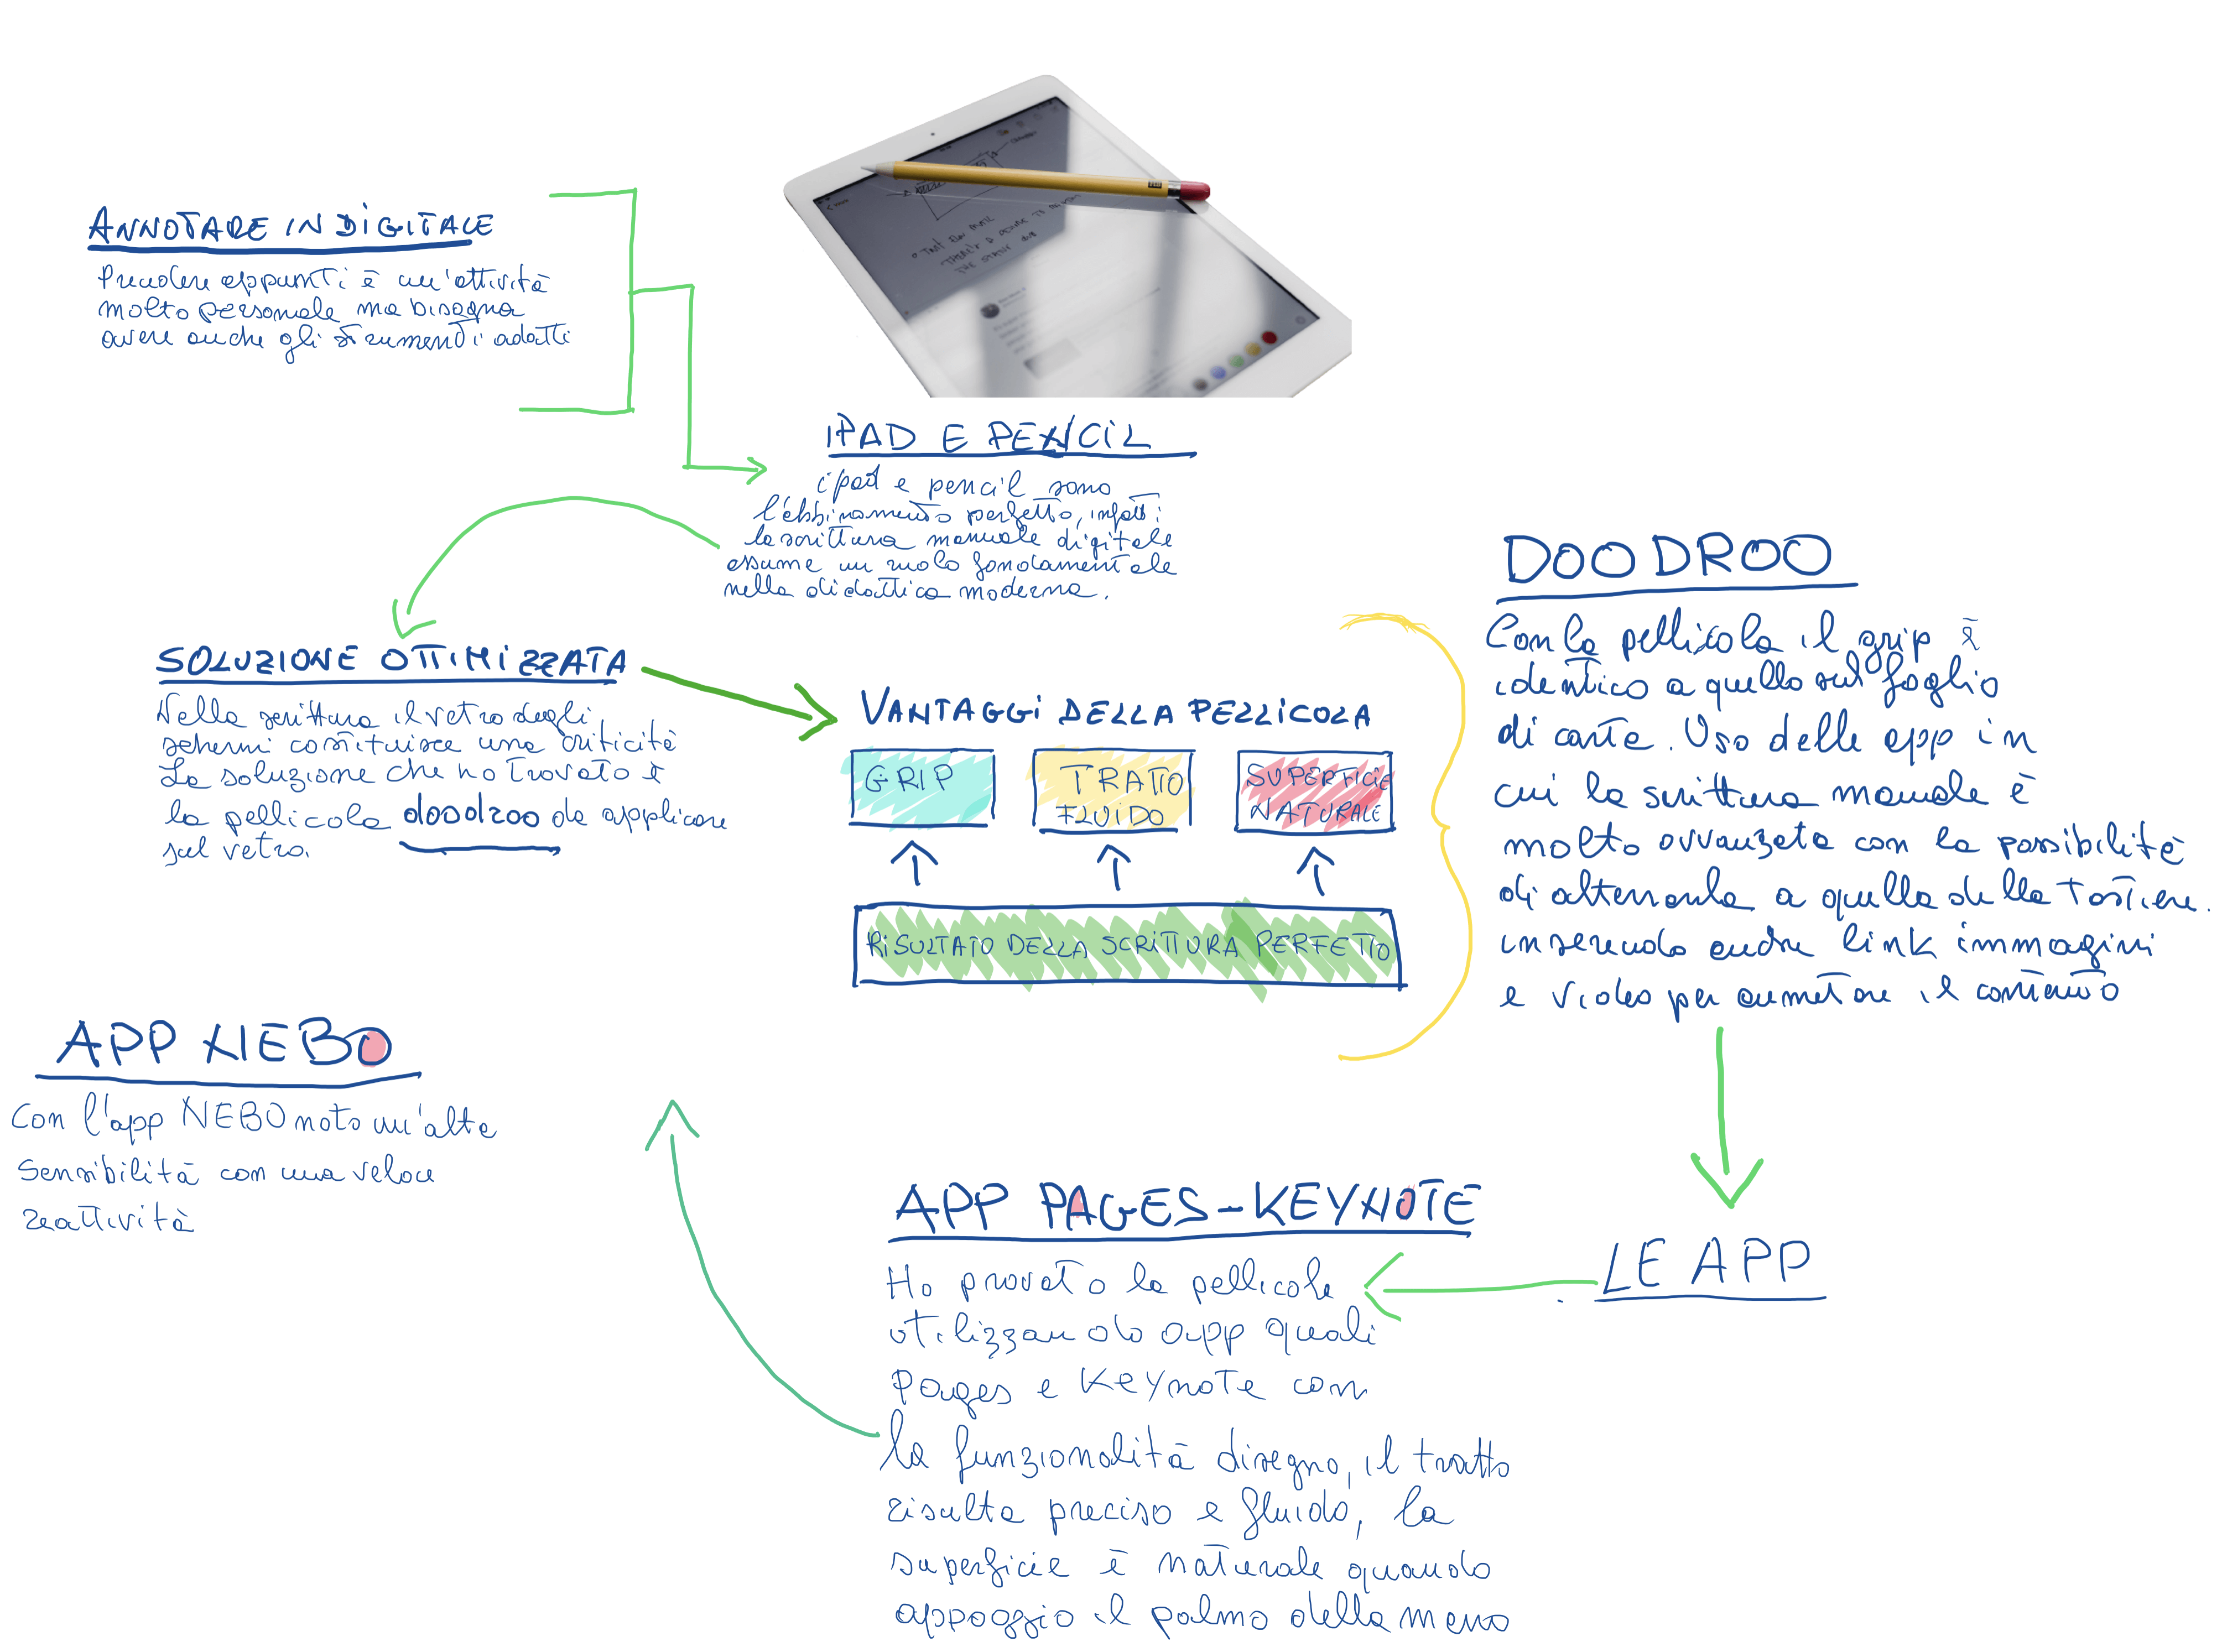 Taking notes digitally - iPad Apple Pencil and doodroo in teaching